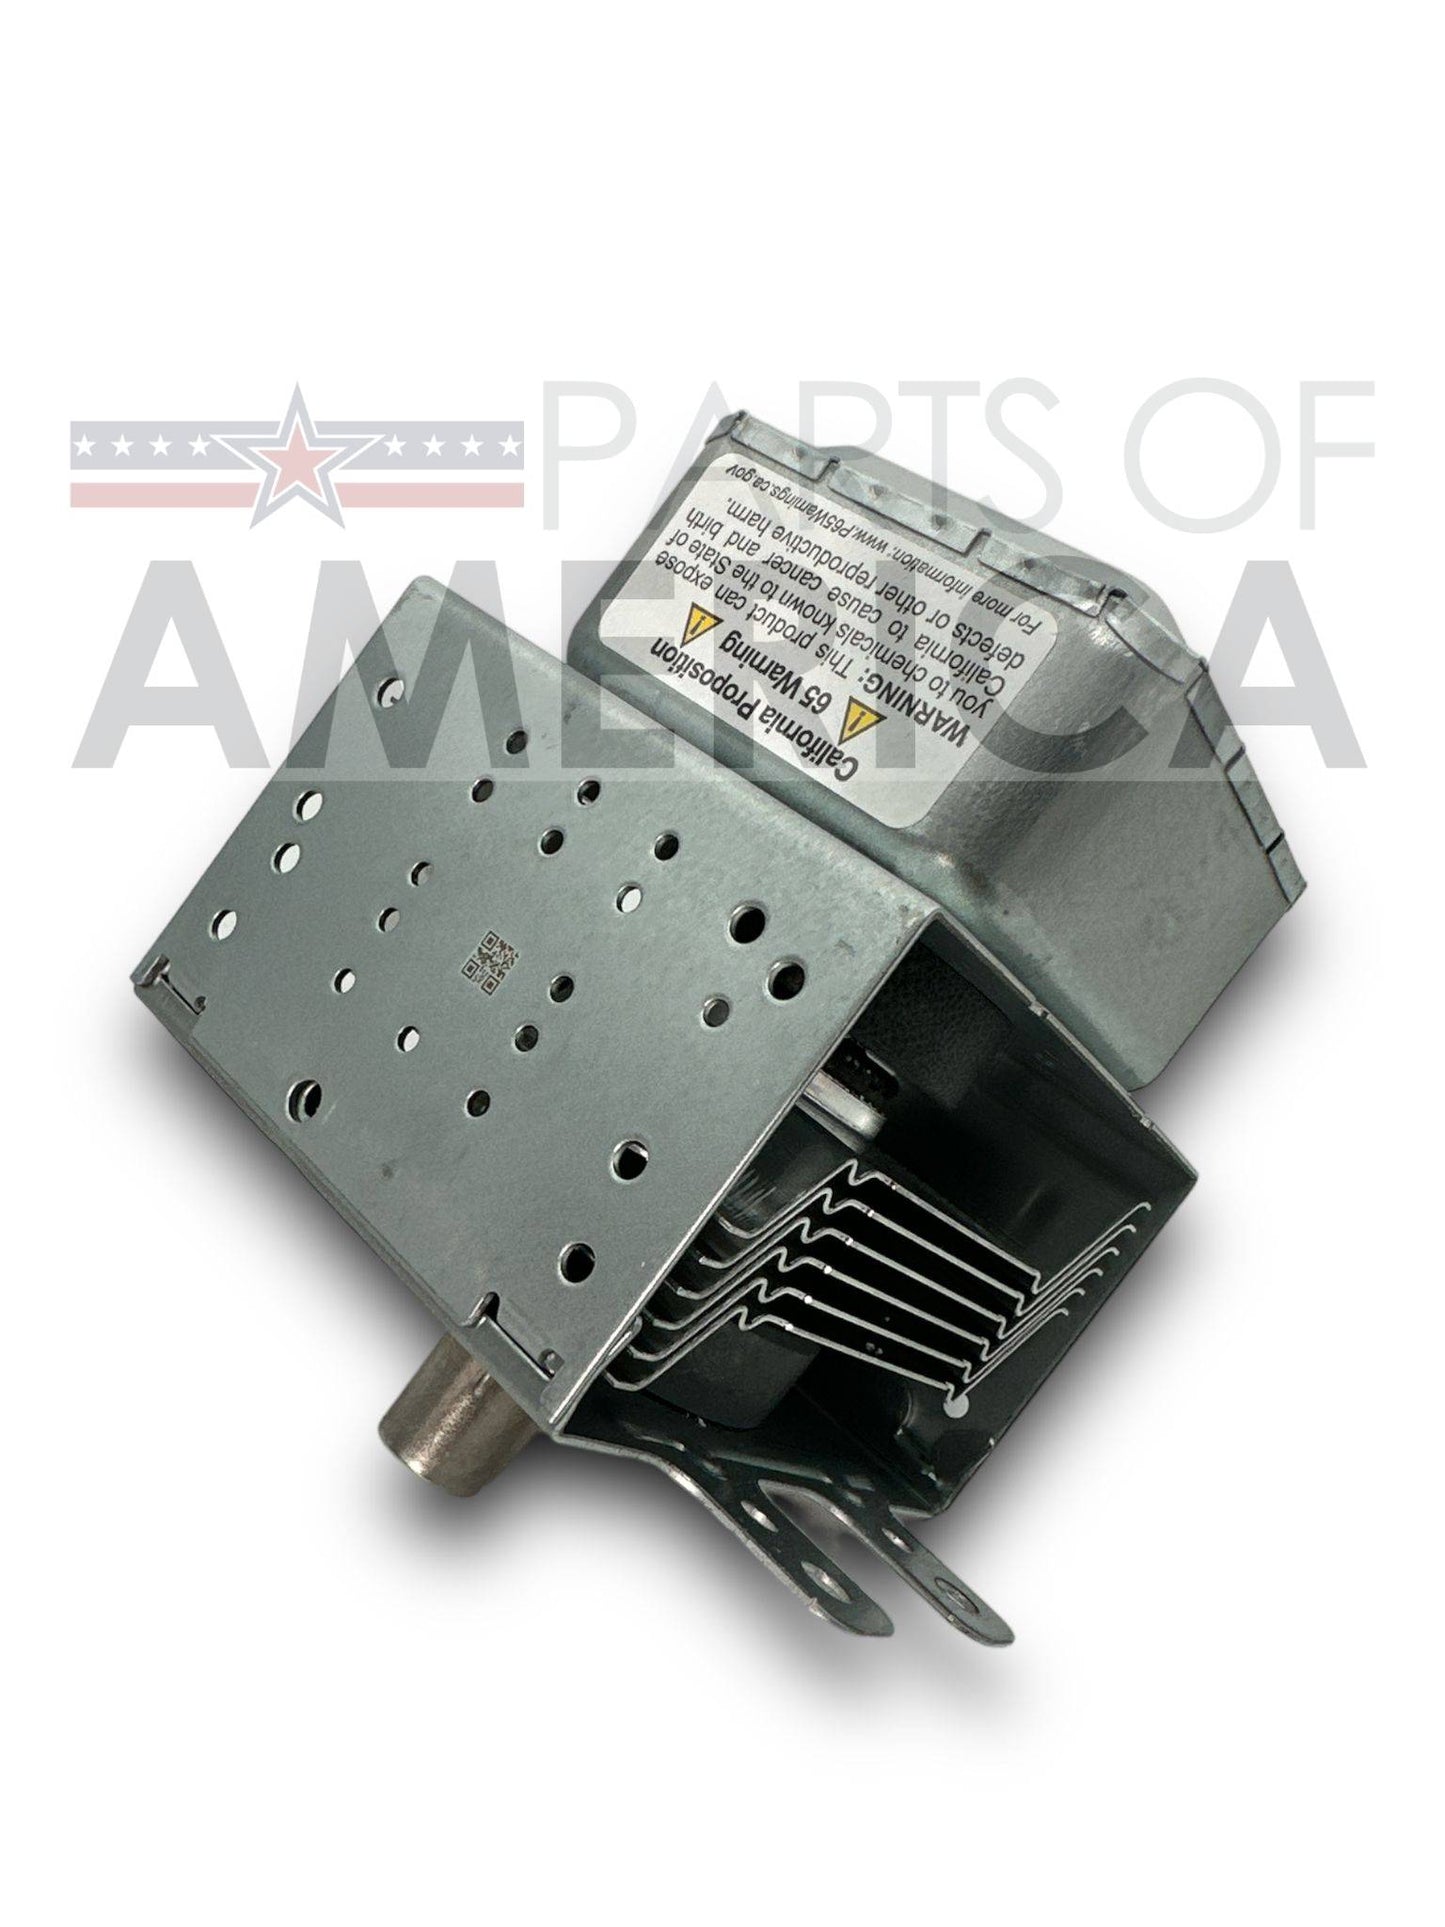 Whirlpool Microwave Magnetron Assembly - W11402082, Replaces: W11115131 W11213359 AP6973490 PS12731283 EAP12731283 PD00059409